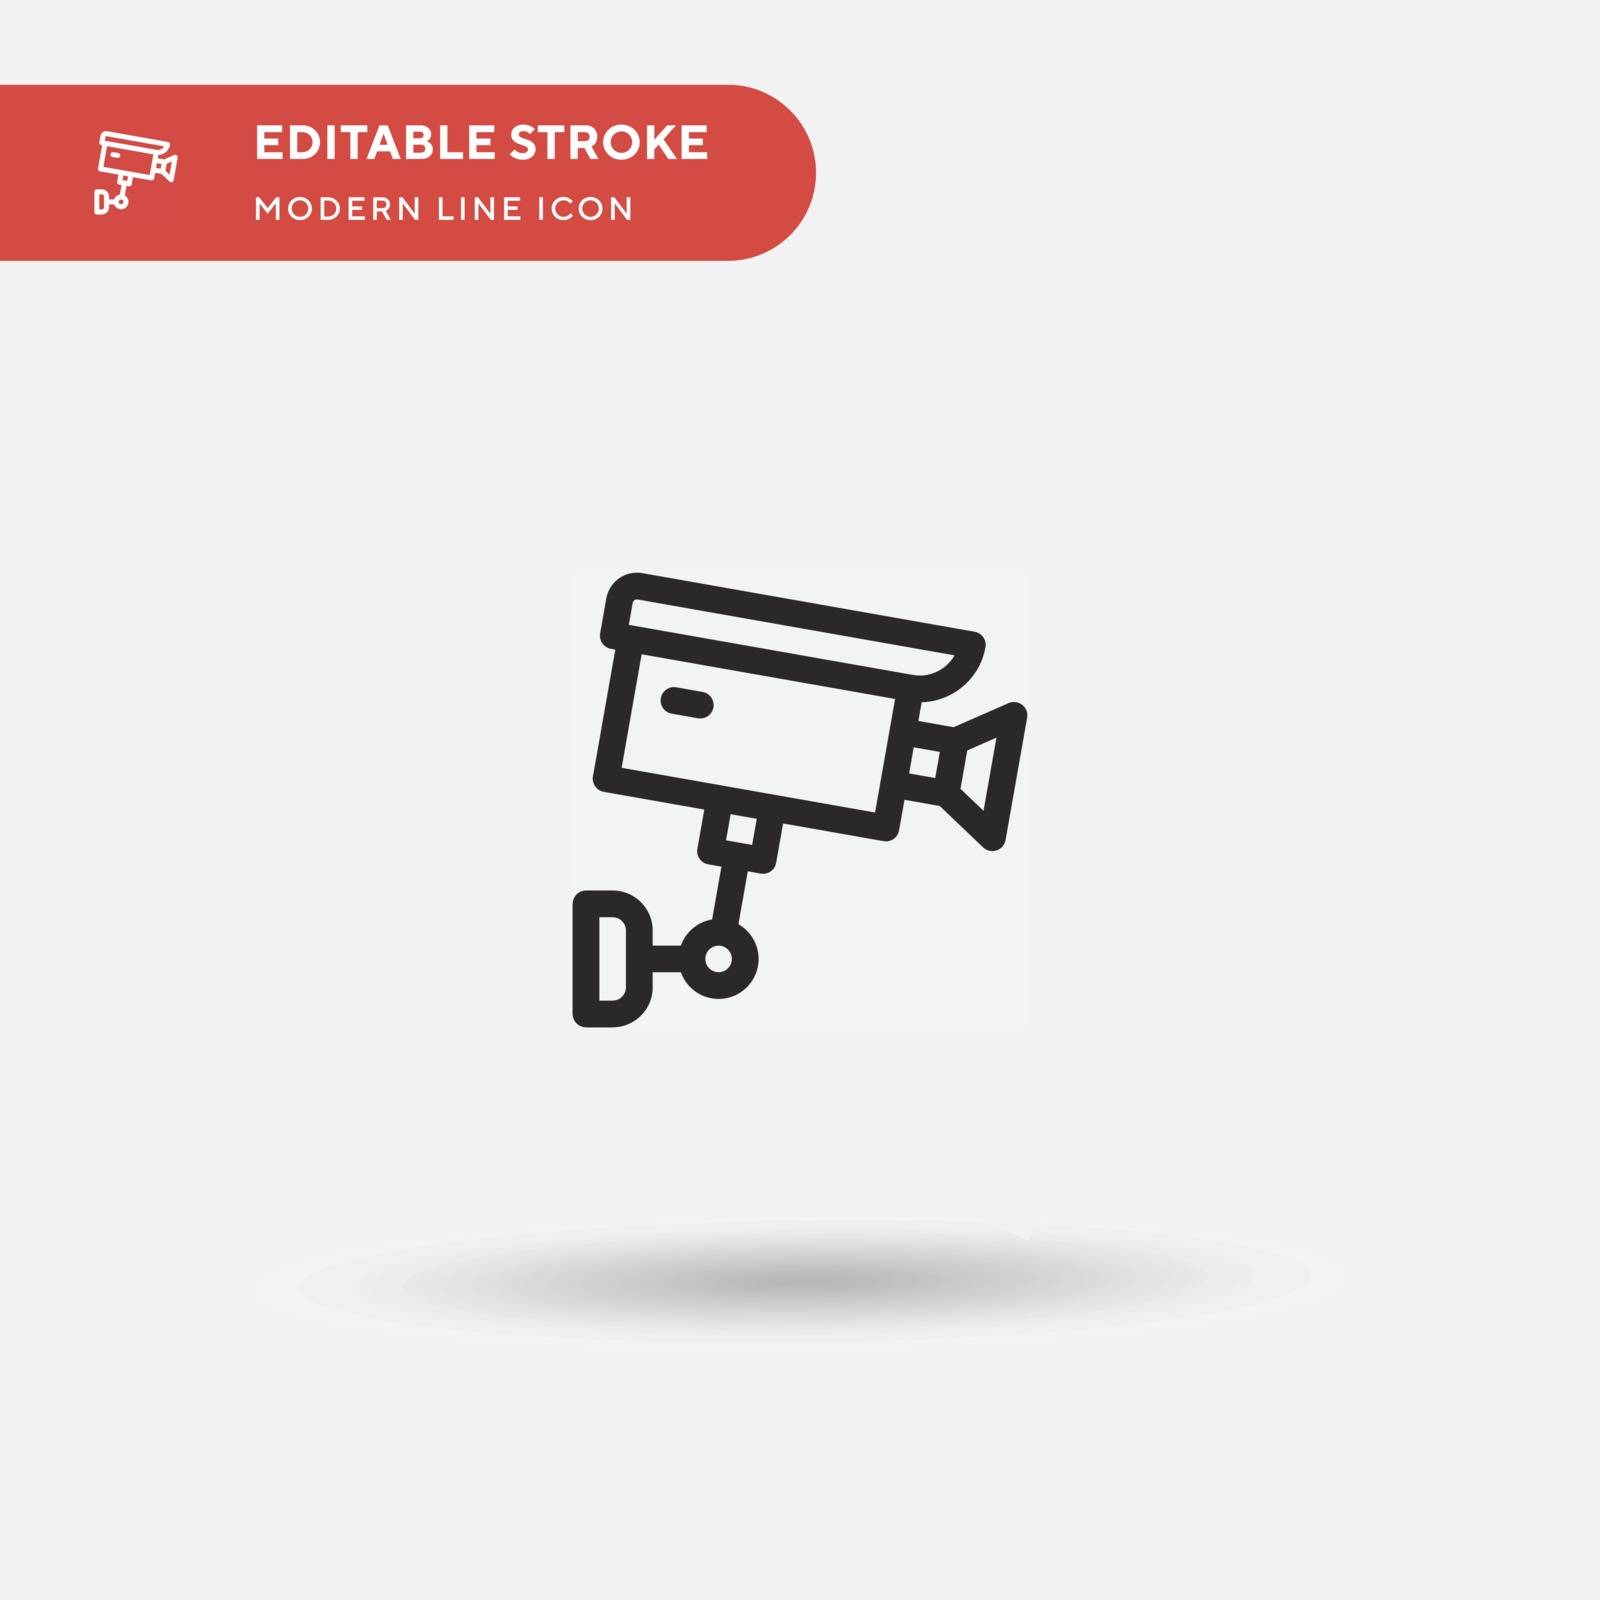 Cctv Simple vector icon. Illustration symbol design template for by guapoo